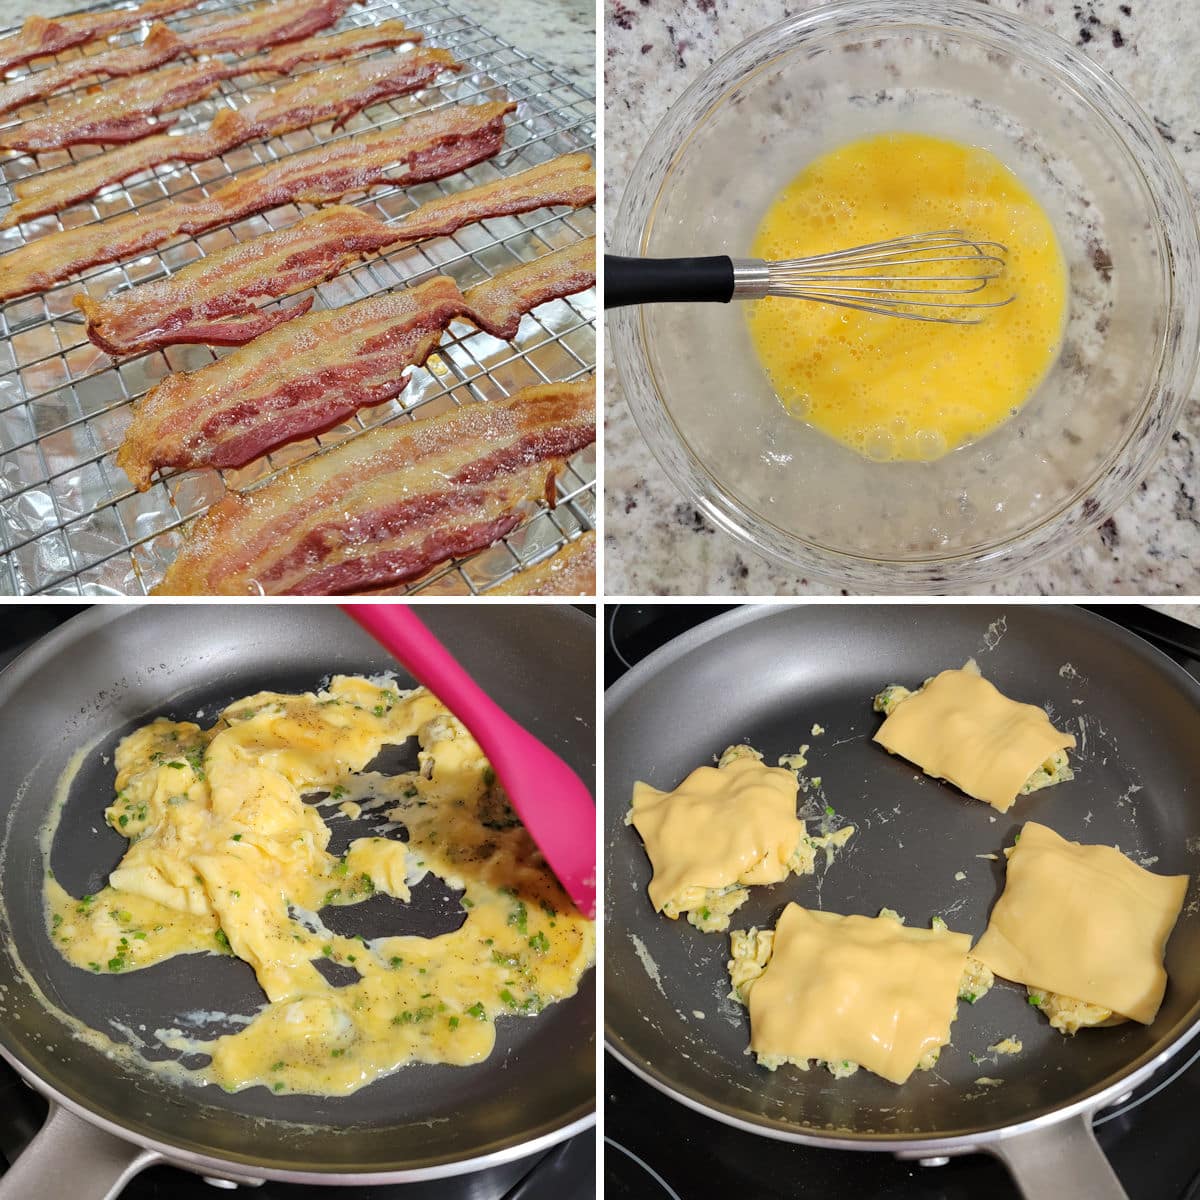 Making ingredients for a bacon, egg, and cheese sandwich.